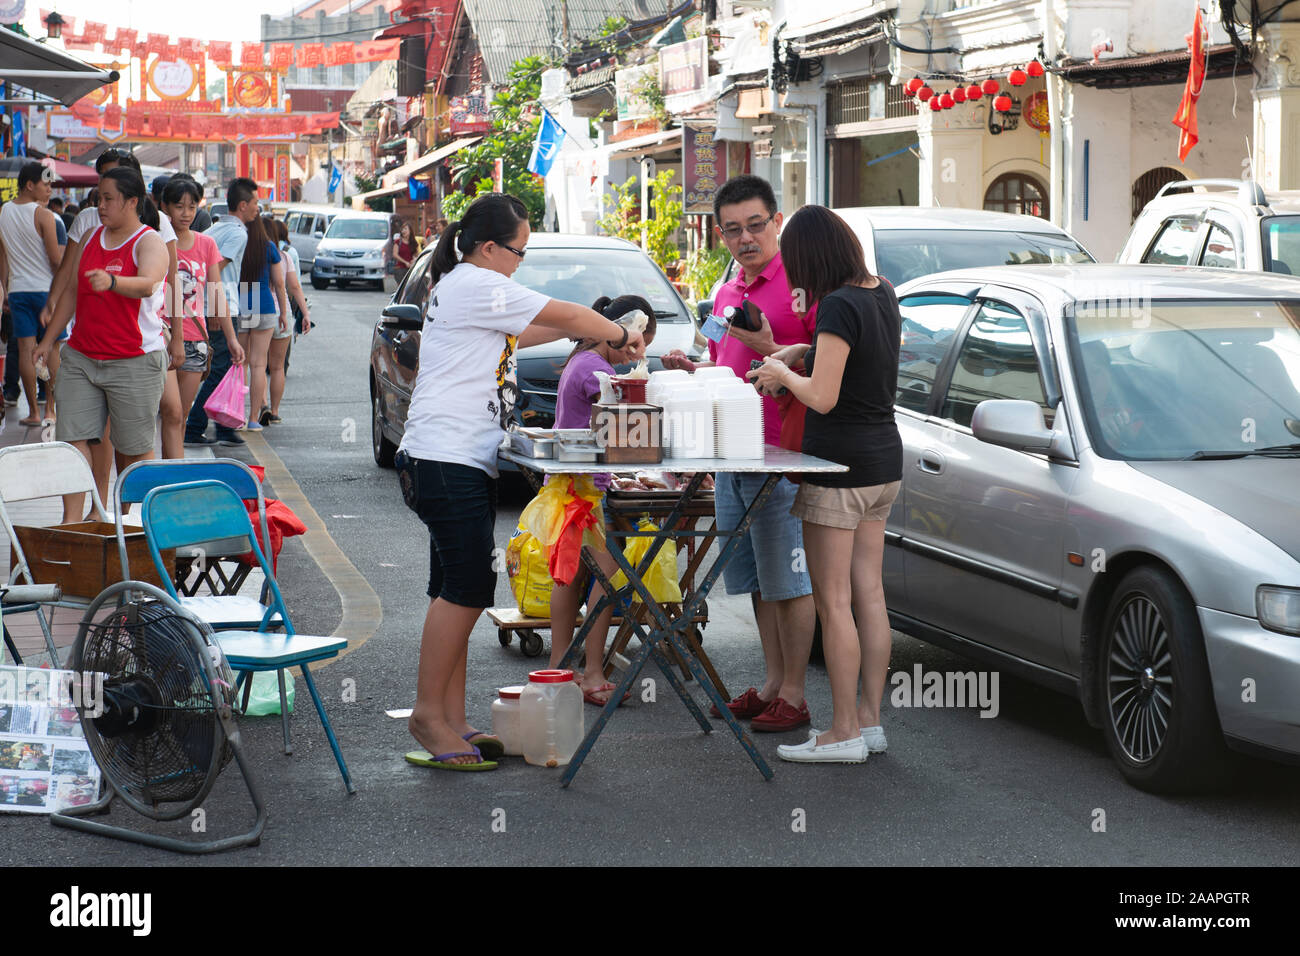 Local people preparing street food for the weekend night-market in Malacca, Malaysia Stock Photo